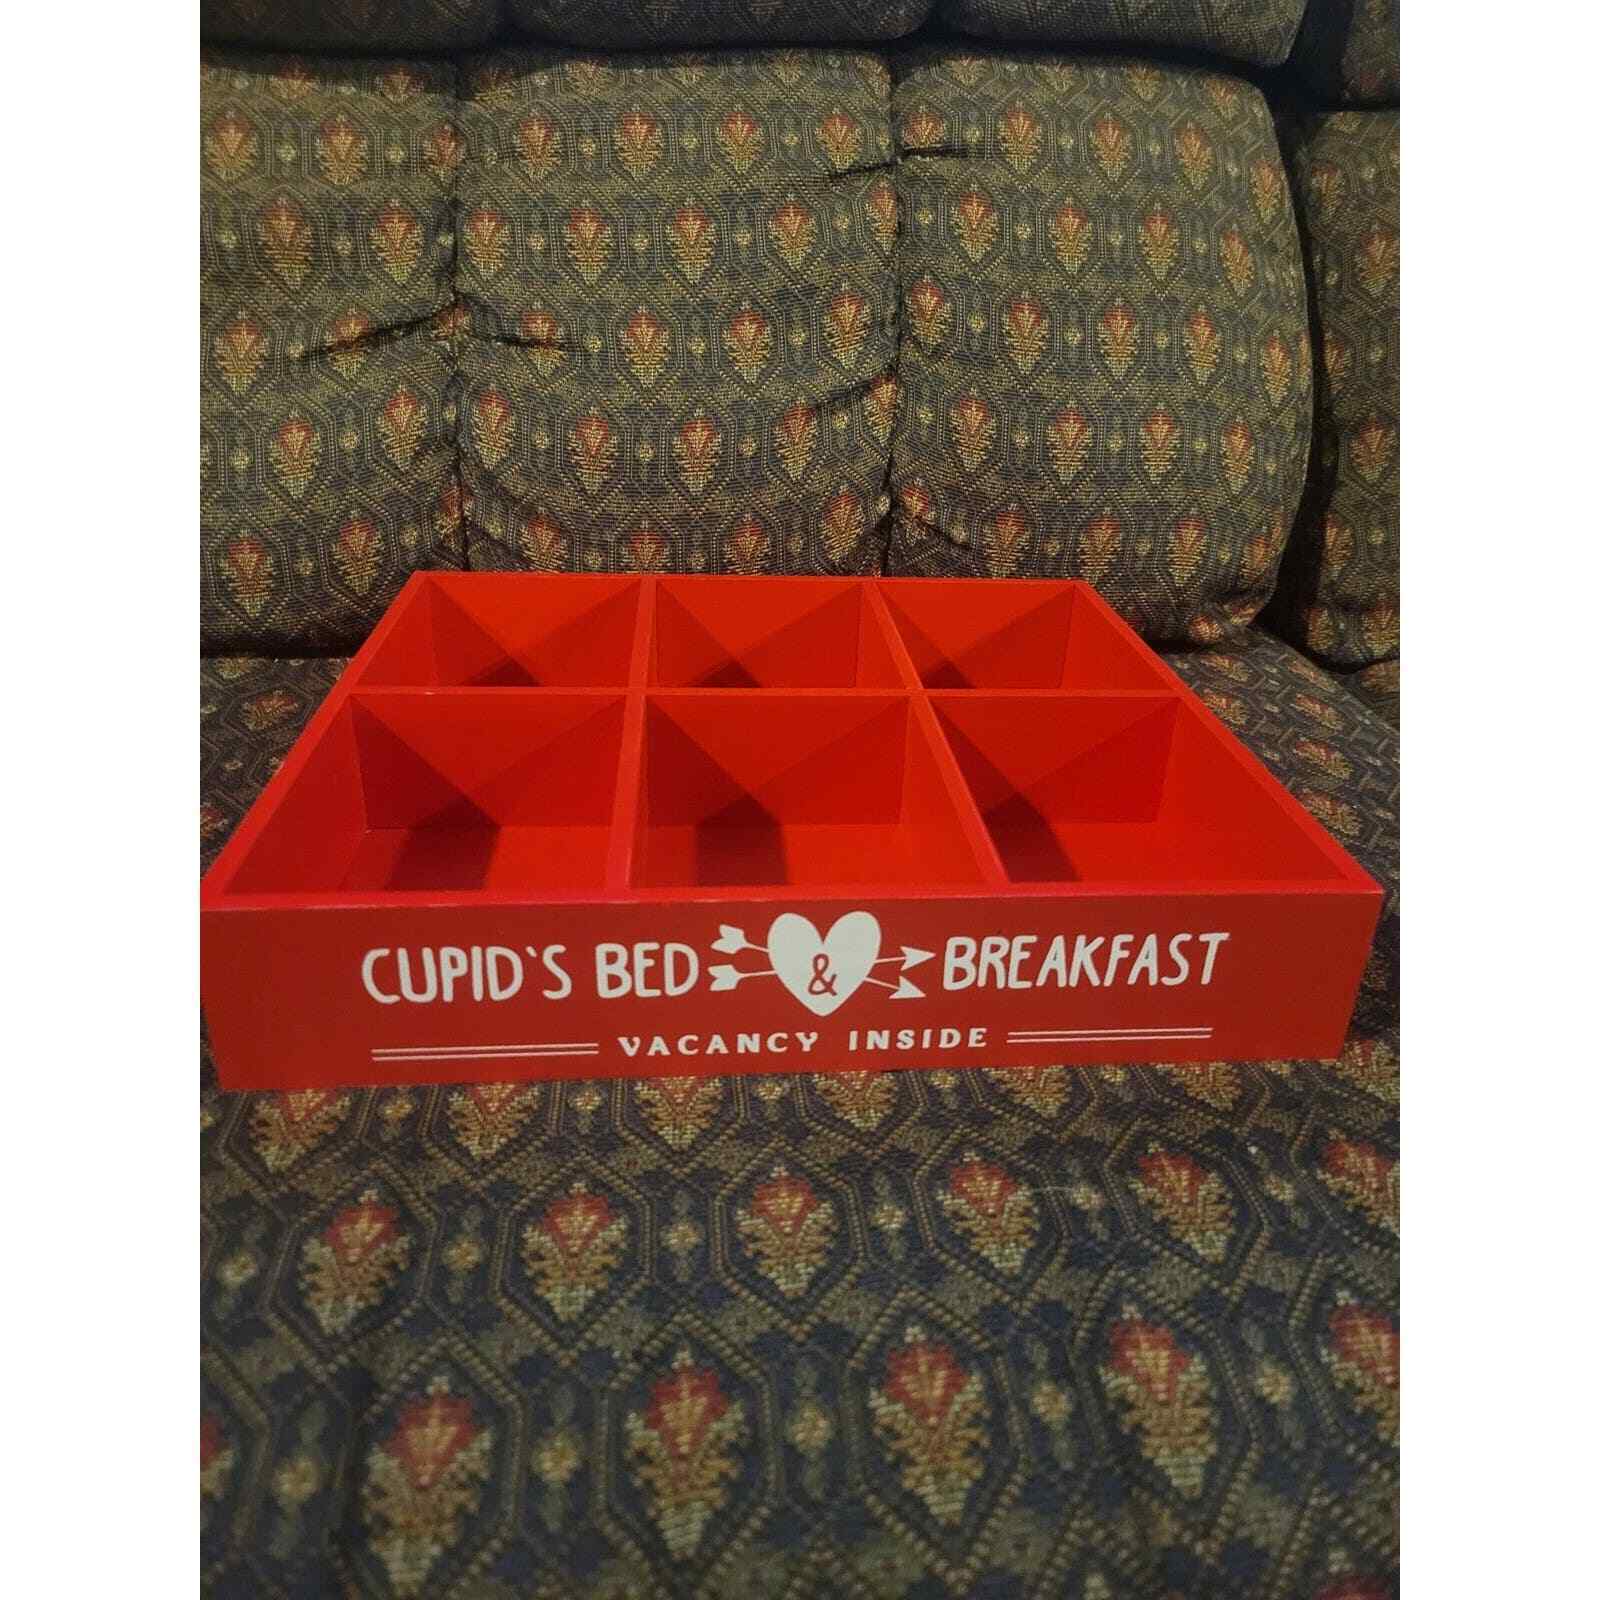 NEW Target Bullseye Playground Crate Valentine's Red CUPID'S BED & BREAKFAST